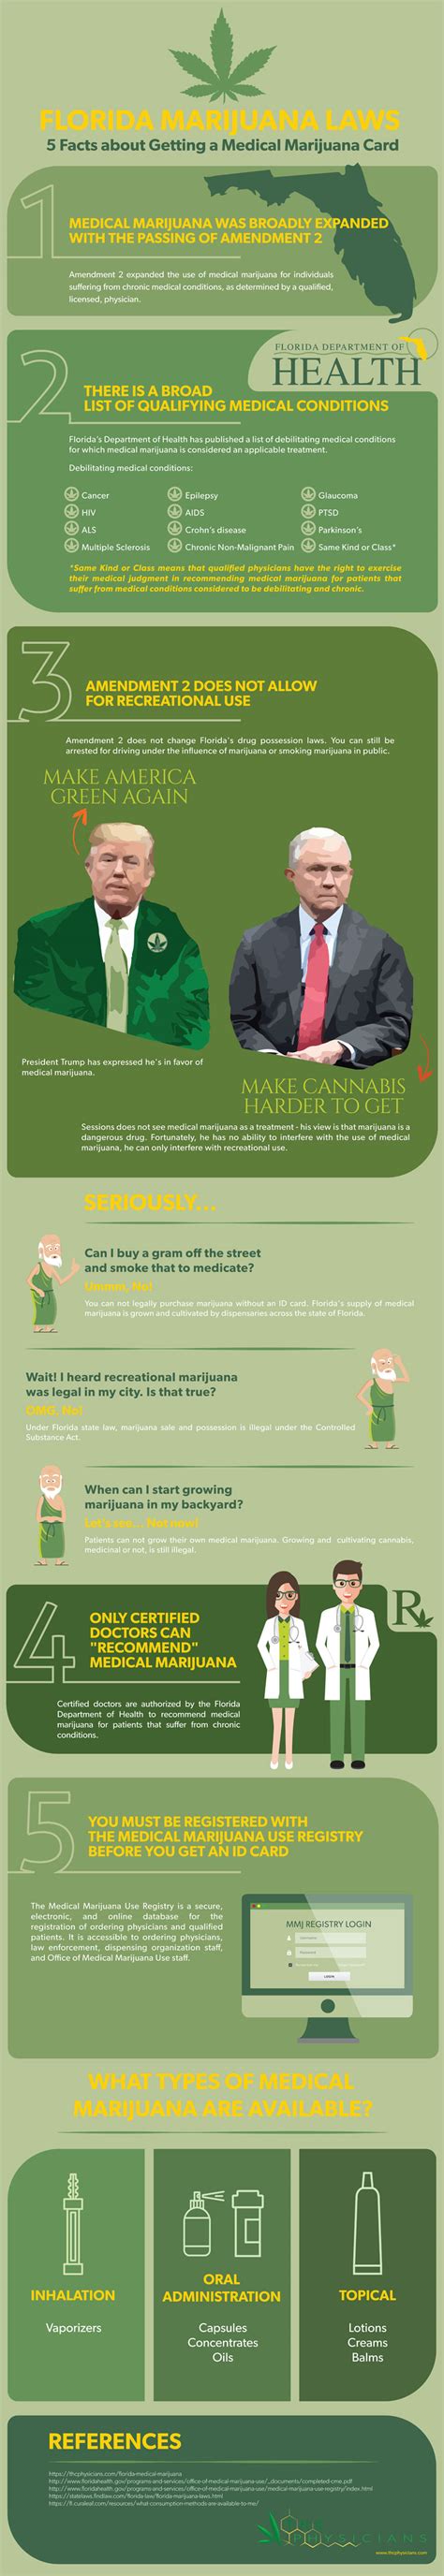 It entitles the owner to a higher grade of weed available in edible or smoke form and must be signed off by a medical doctor. Florida Marijuana Laws: 5 Medical Marijuana Card Facts - InfographicBee.com